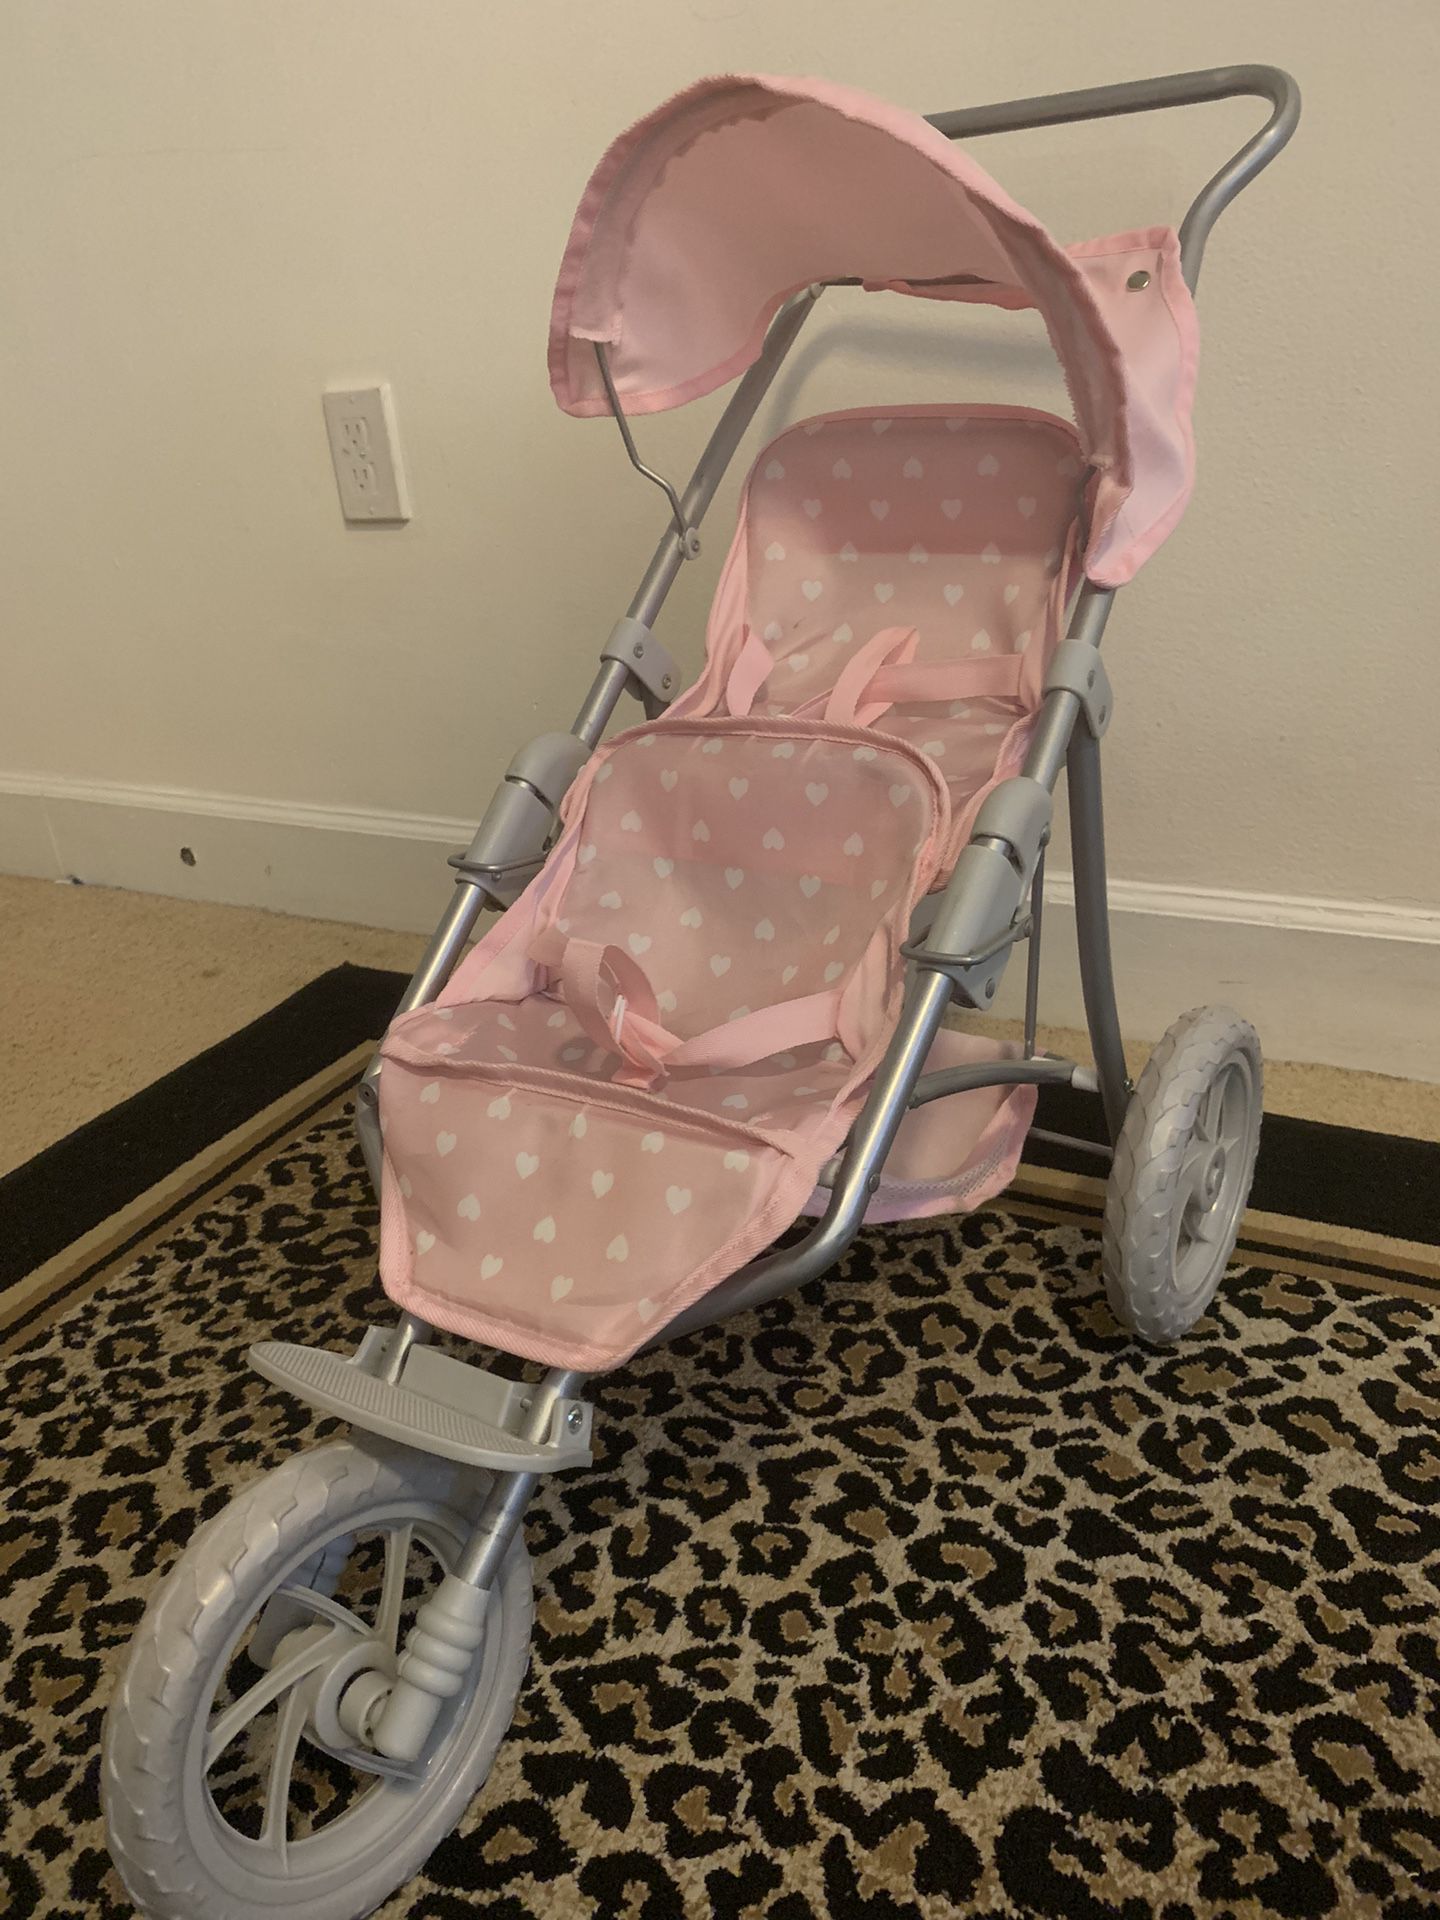 Doll stroller, only the stroller is for sale, not the dolls.